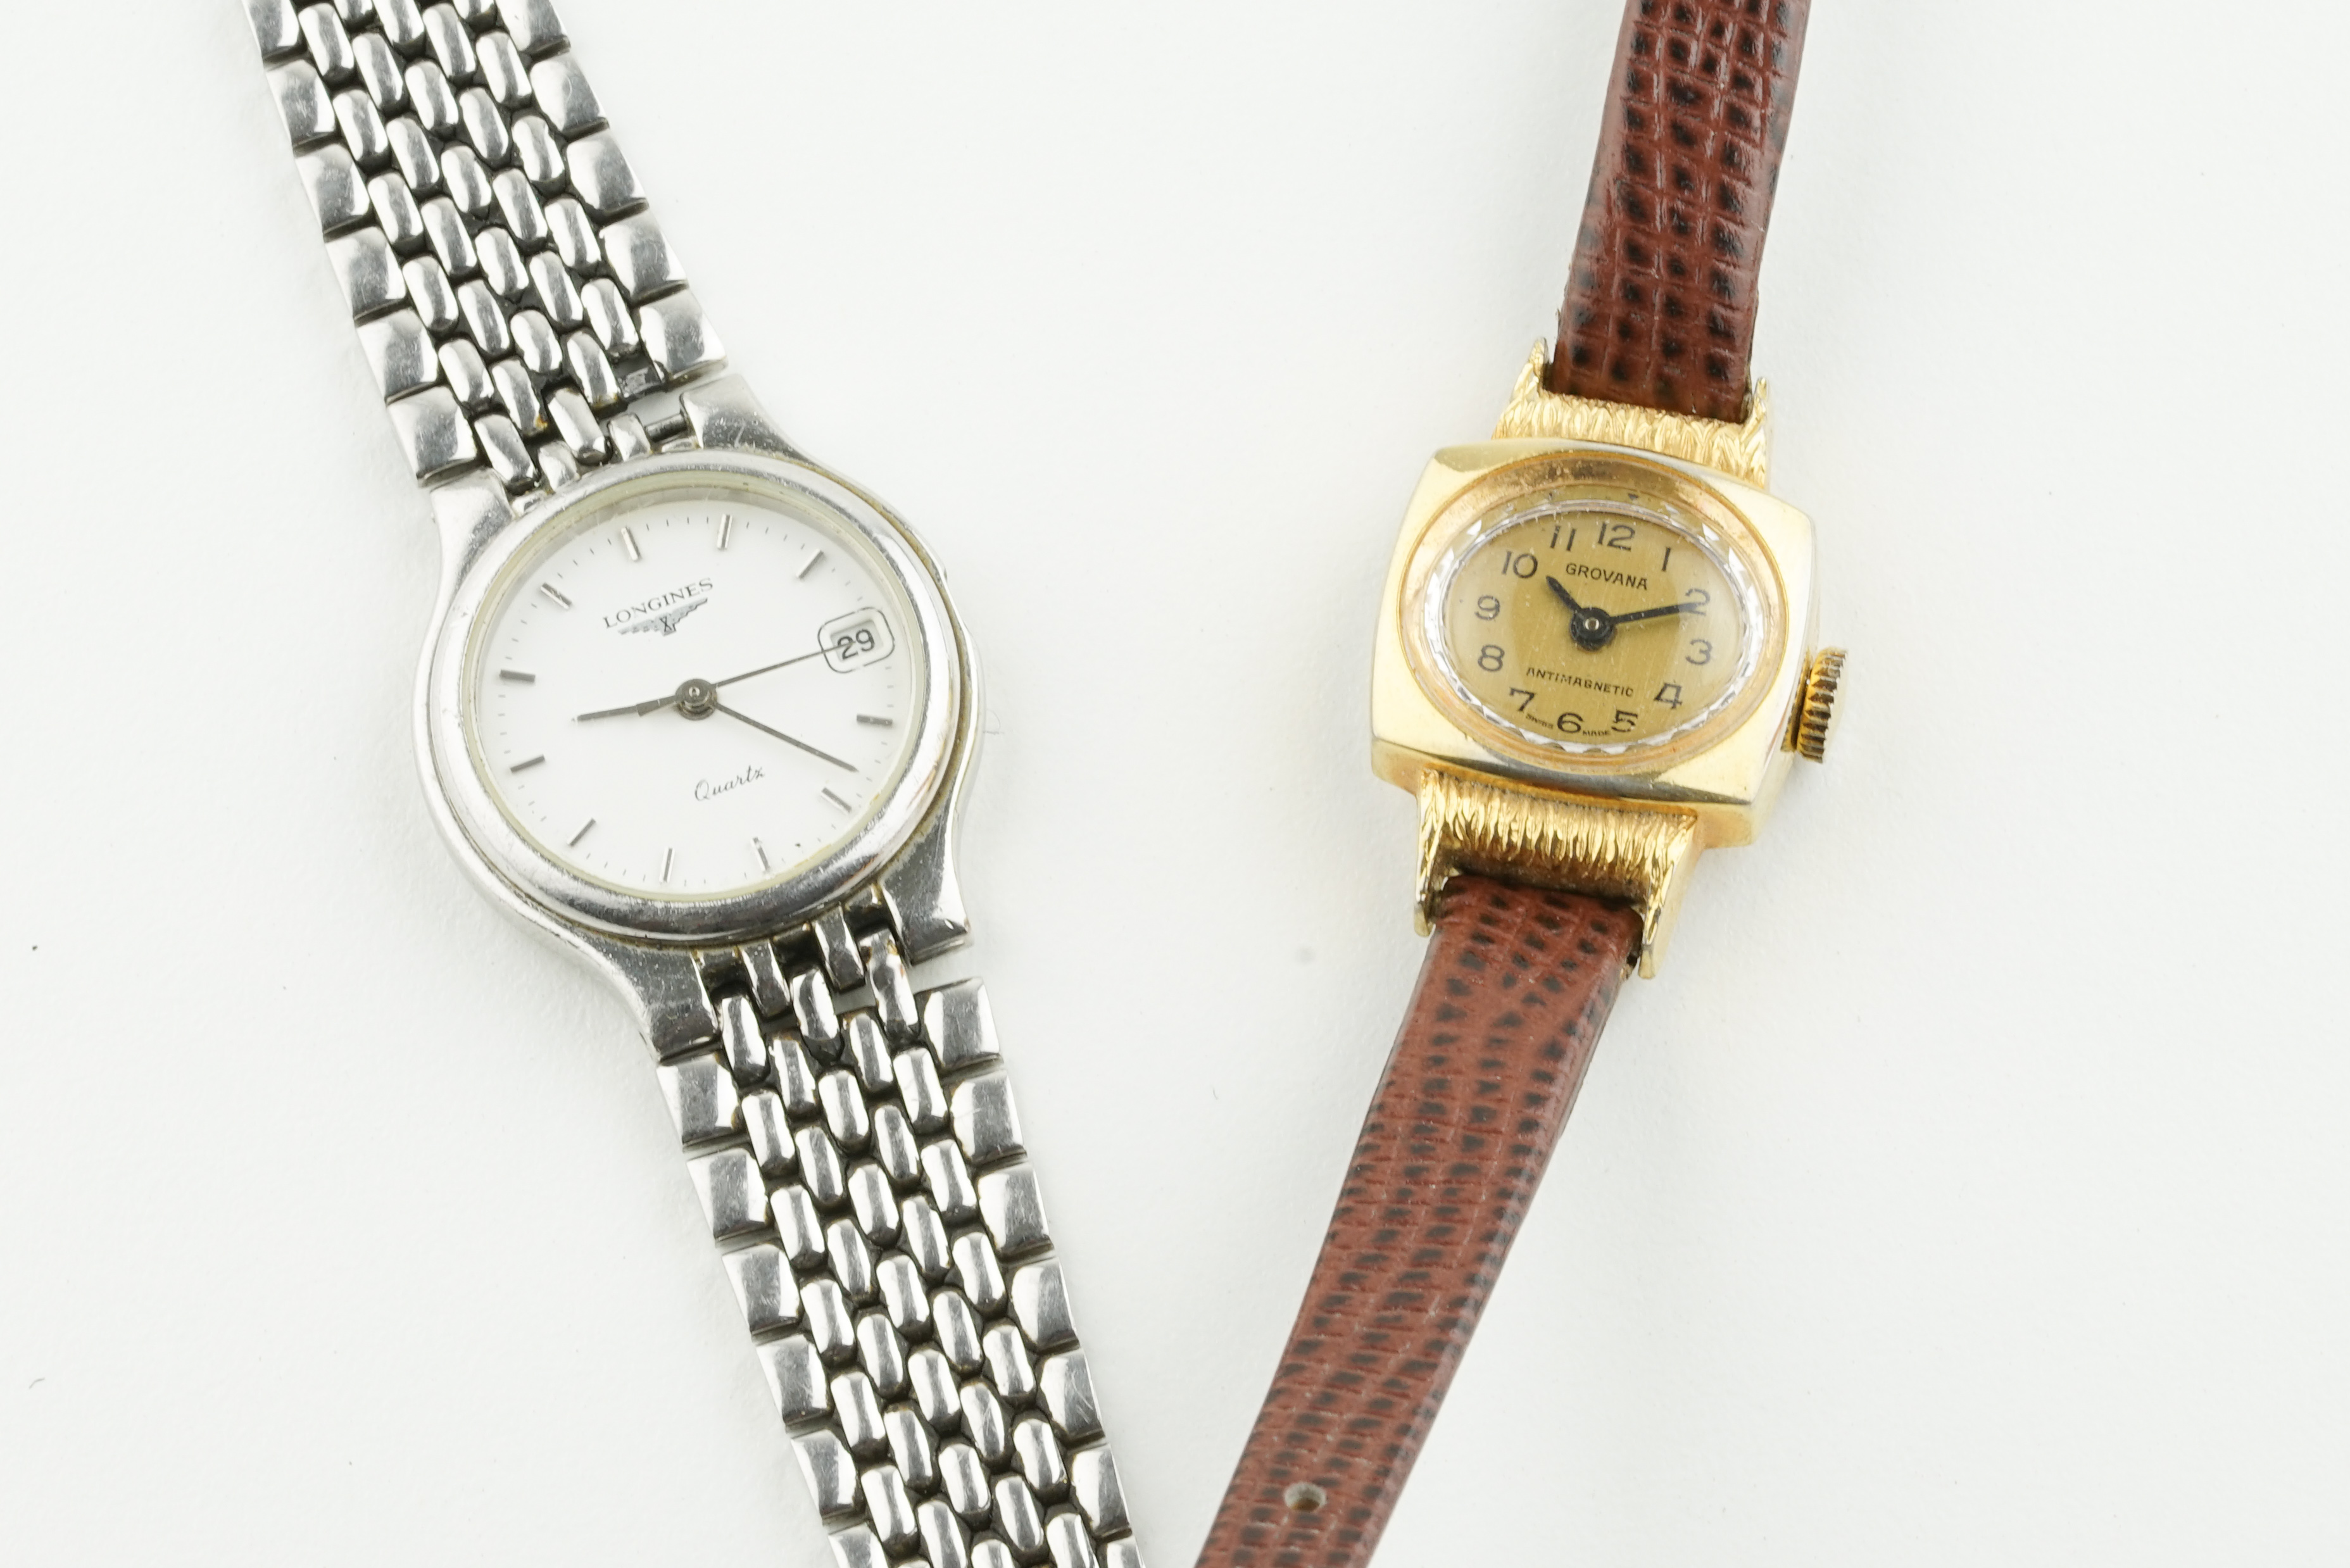 GROUP OF FOUR WRISTWATCHES INL GOLD FILLED LONGINES & TIMES, longines gold filled runs but needs